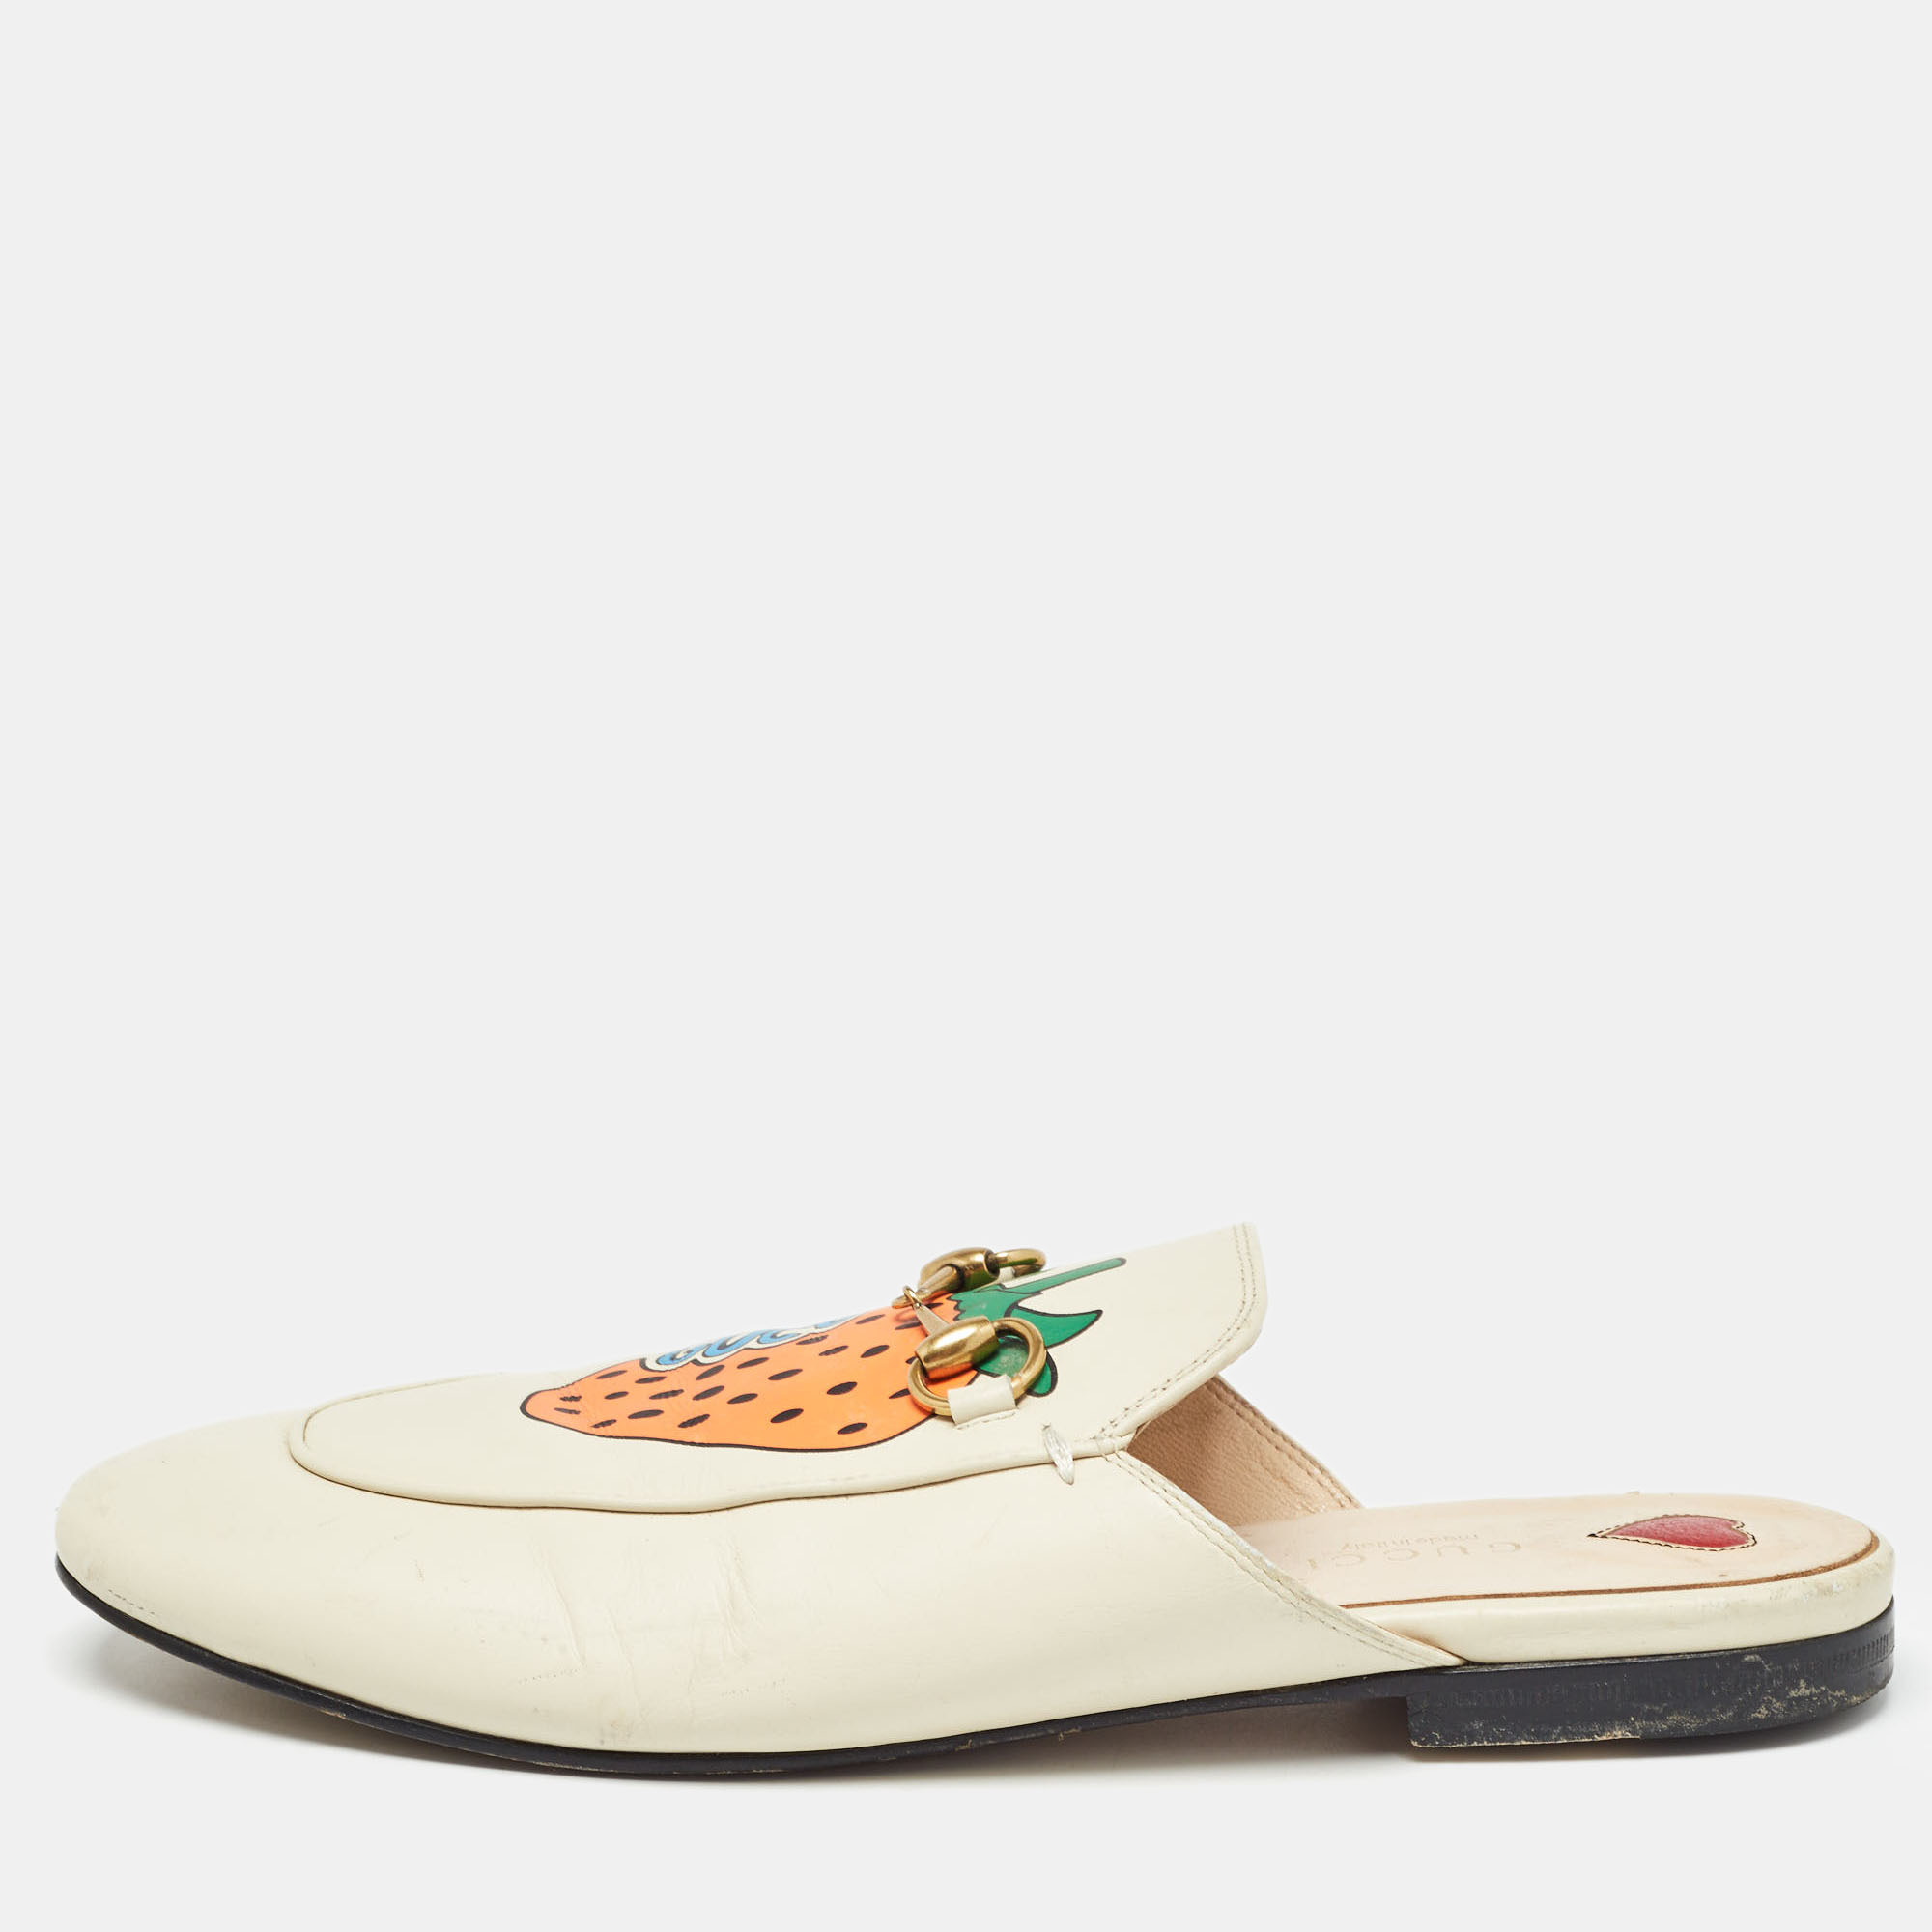 

Gucci Cream Leather Strawberry Print Princetown Flat Mules Size